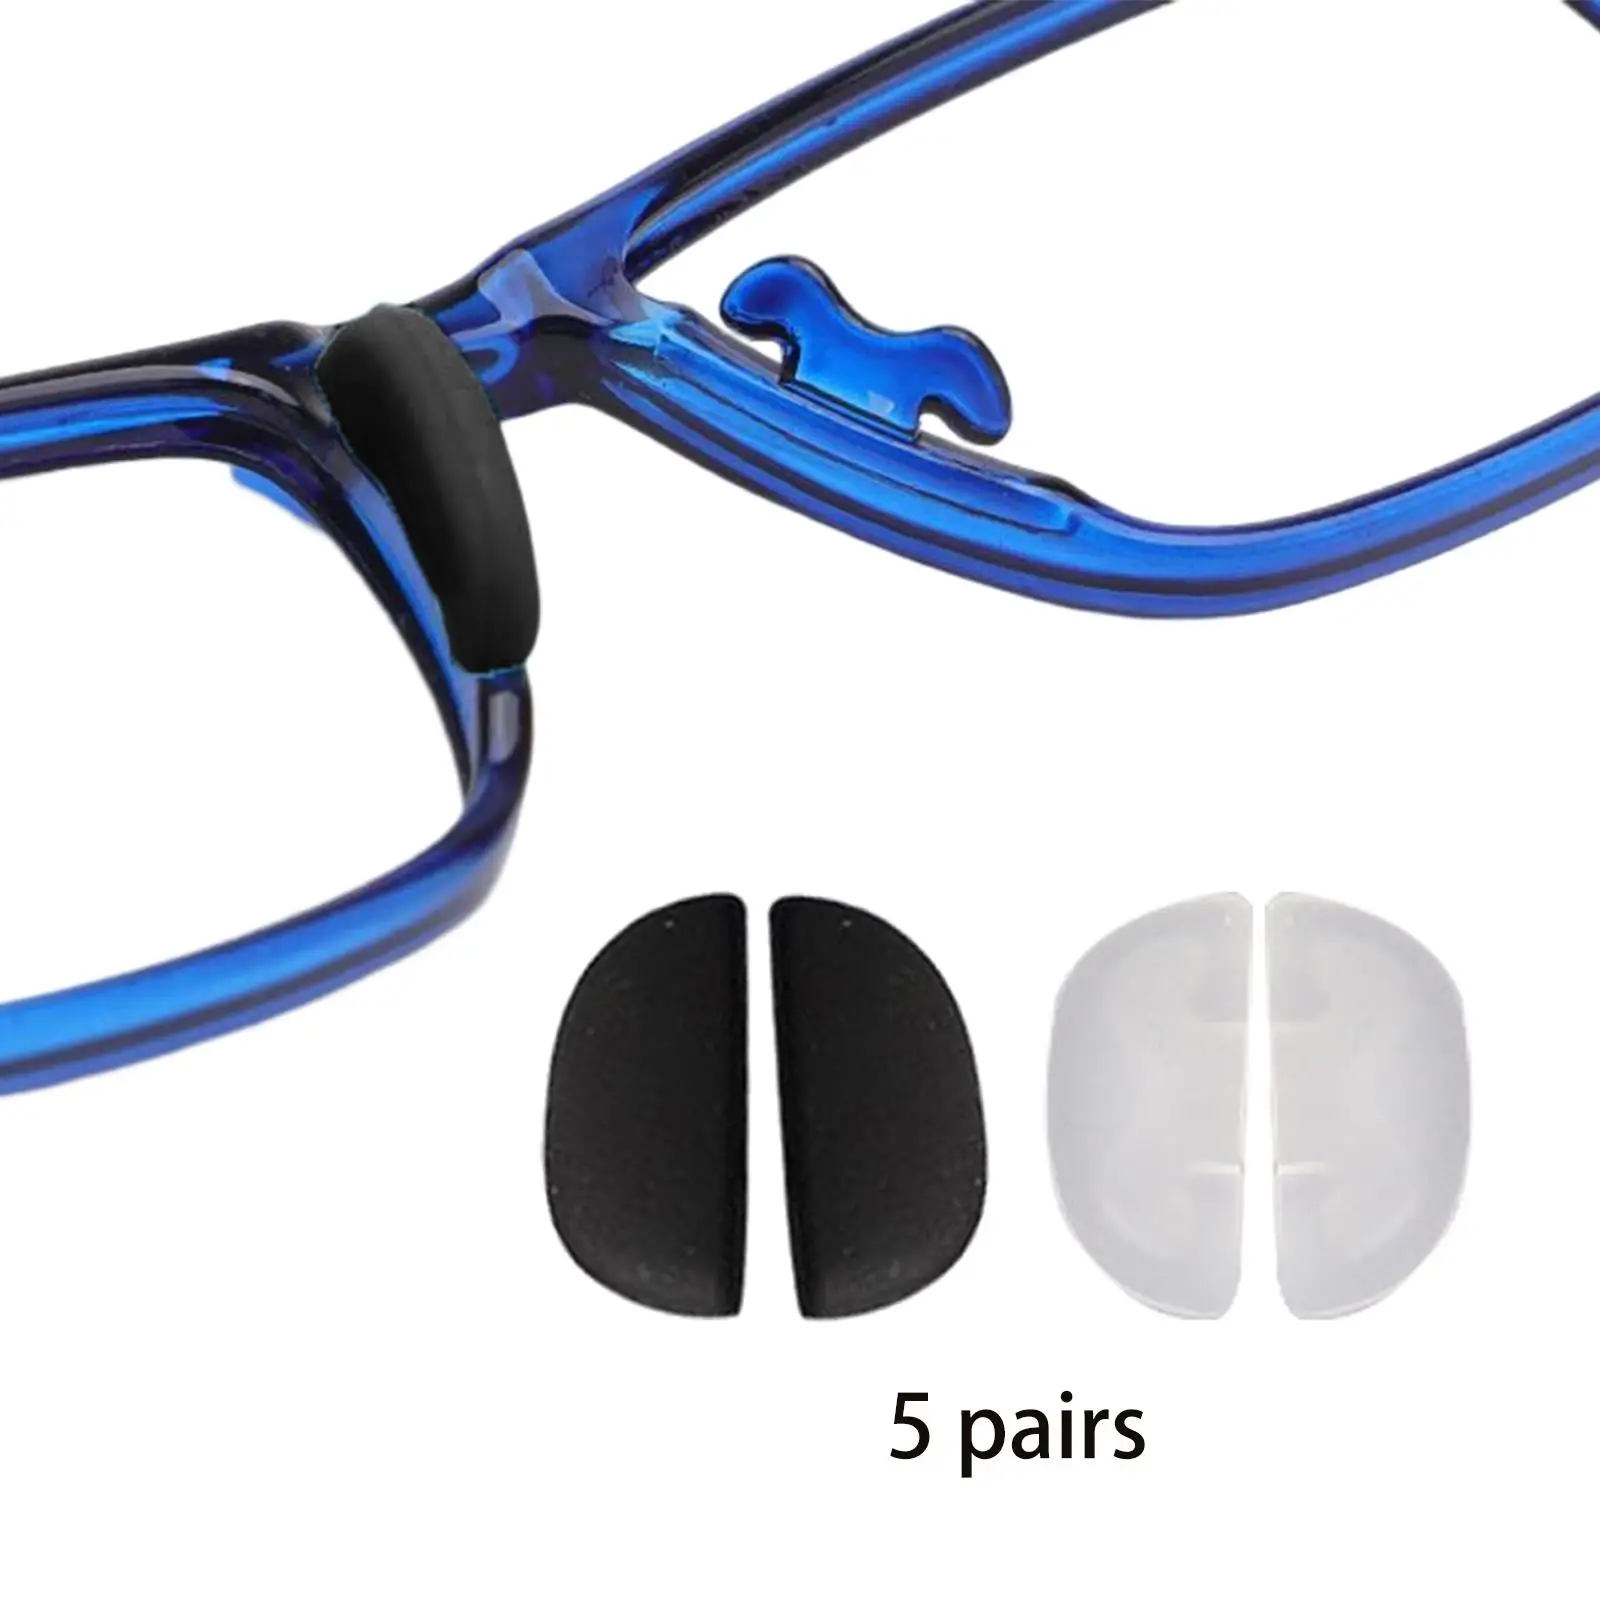 10x Kids Eyeglass Nose Pads Anti Slip Slide/Push in Replacement for Glasses